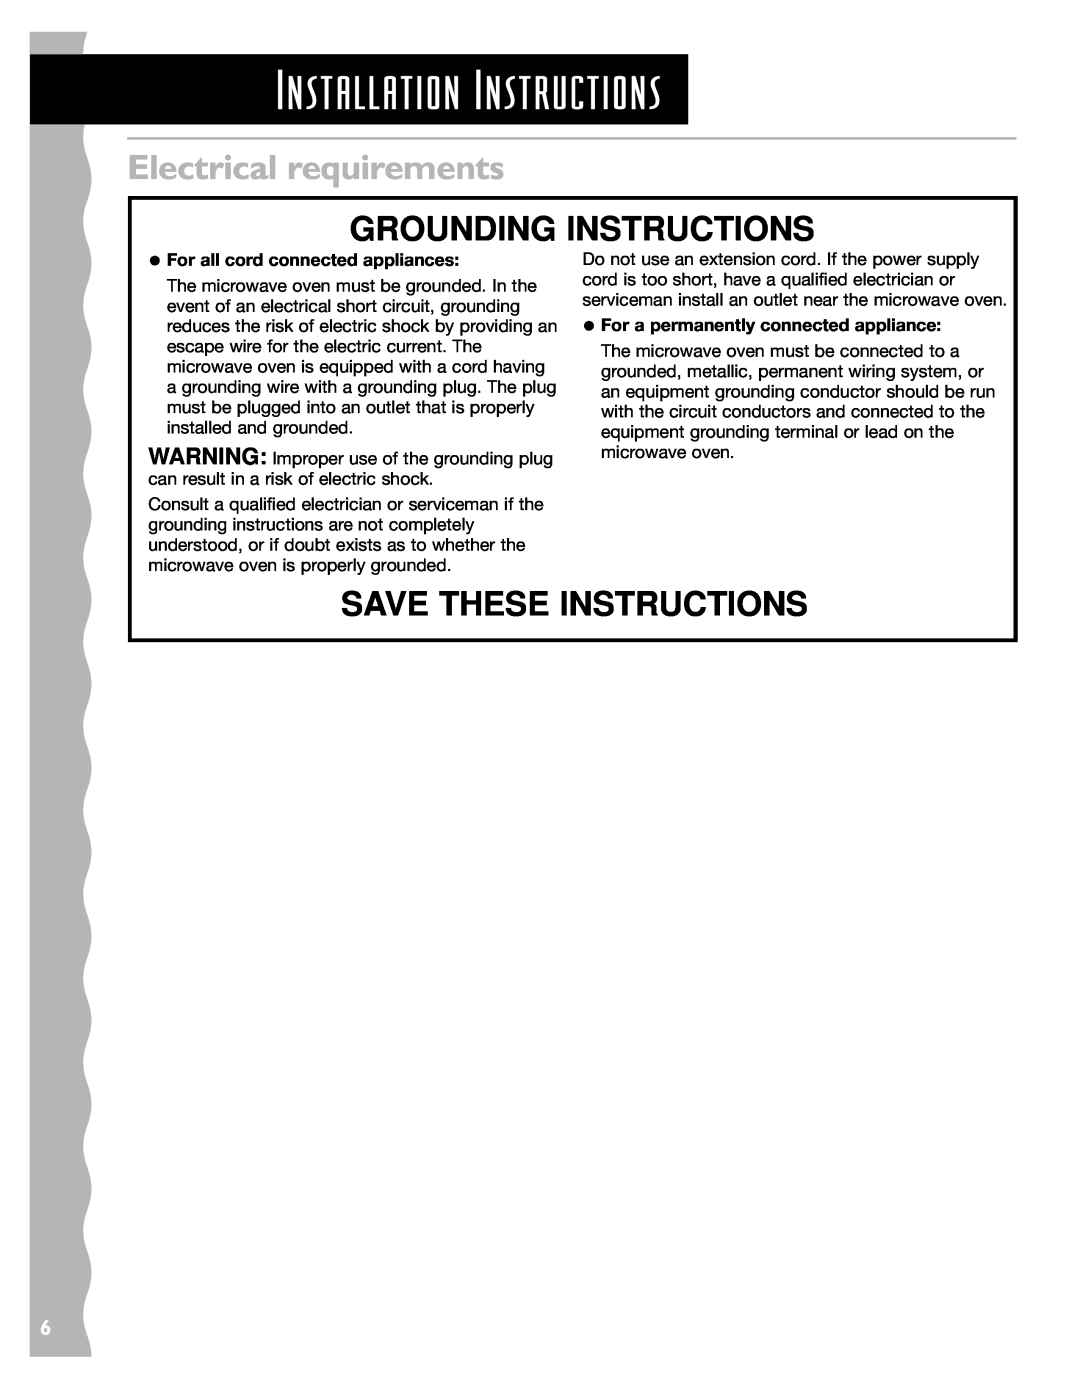 KitchenAid KCMS185J Grounding Instructions, Installation Instructions, Electrical requirements, Save These Instructions 